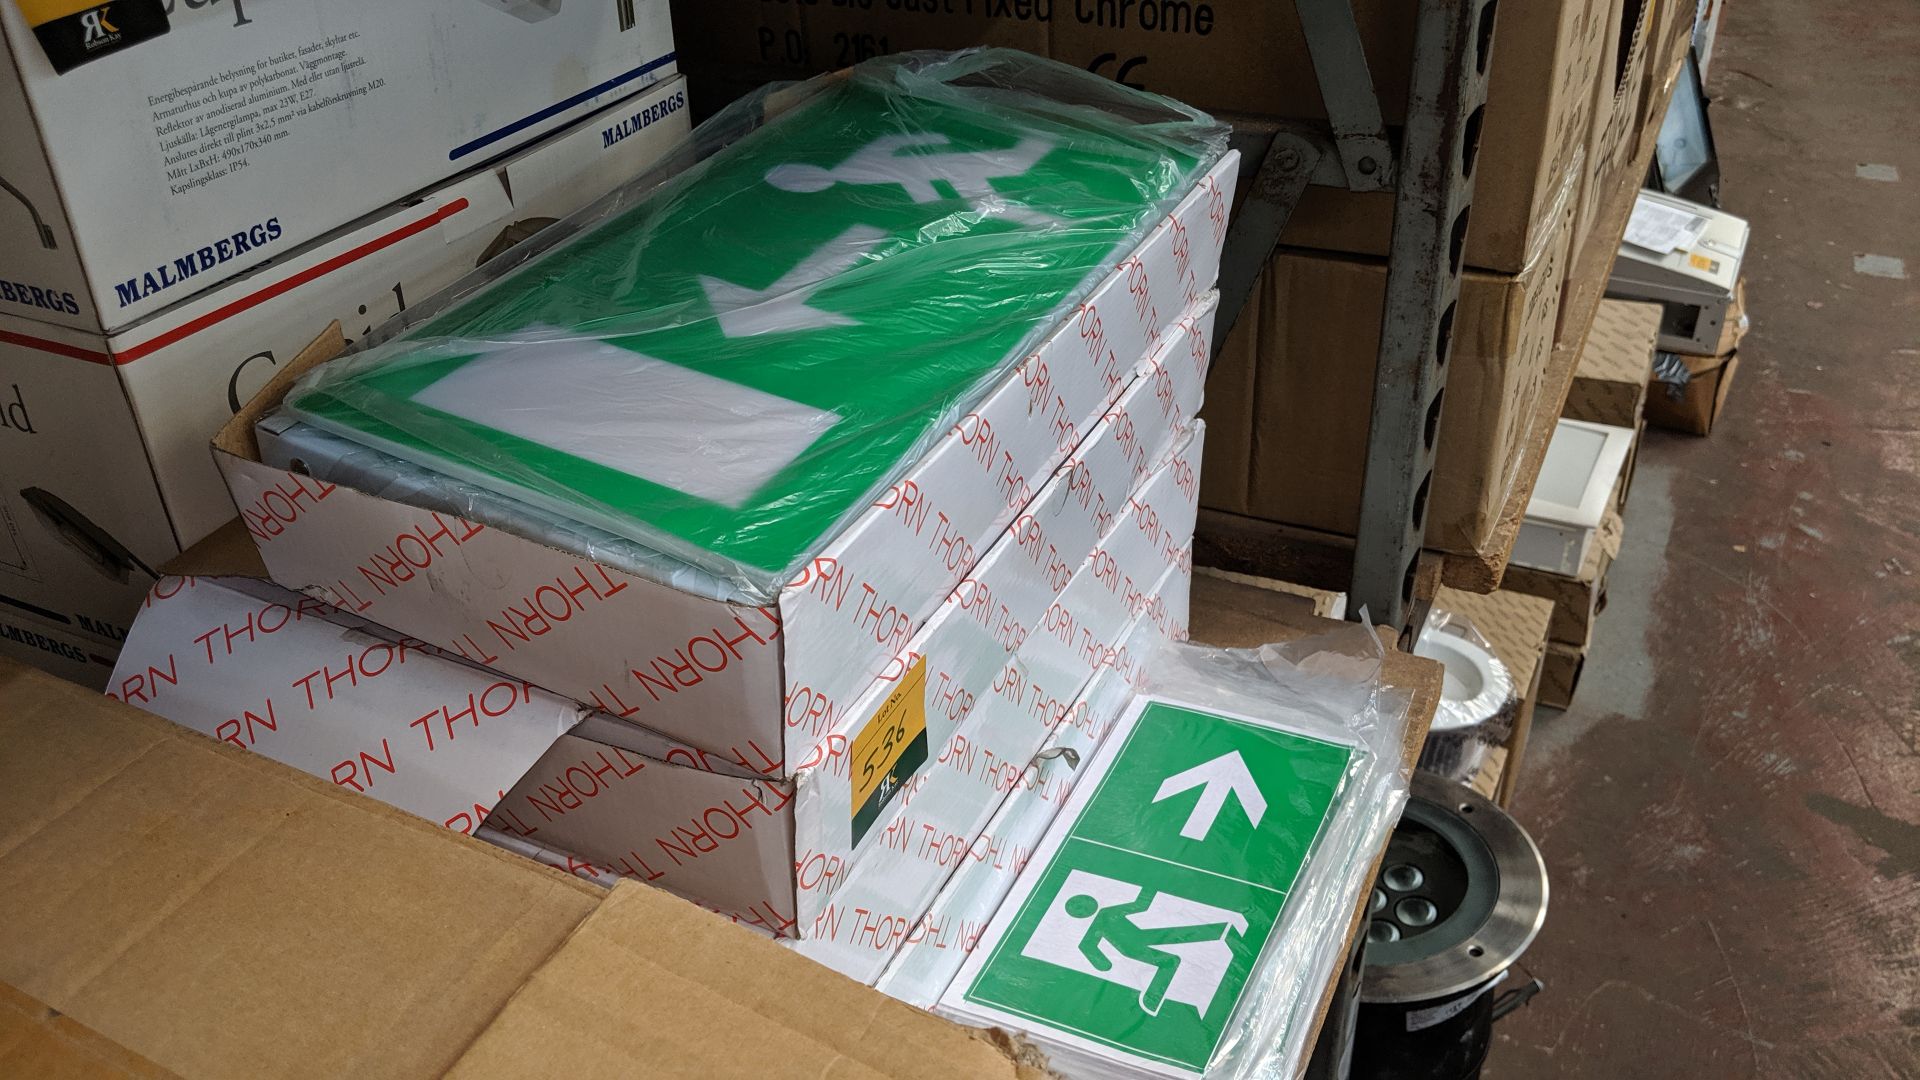 4 off Thorn Emergency Exit lighting units plus quantity of Emergency Lighting stickers. This is - Image 2 of 2